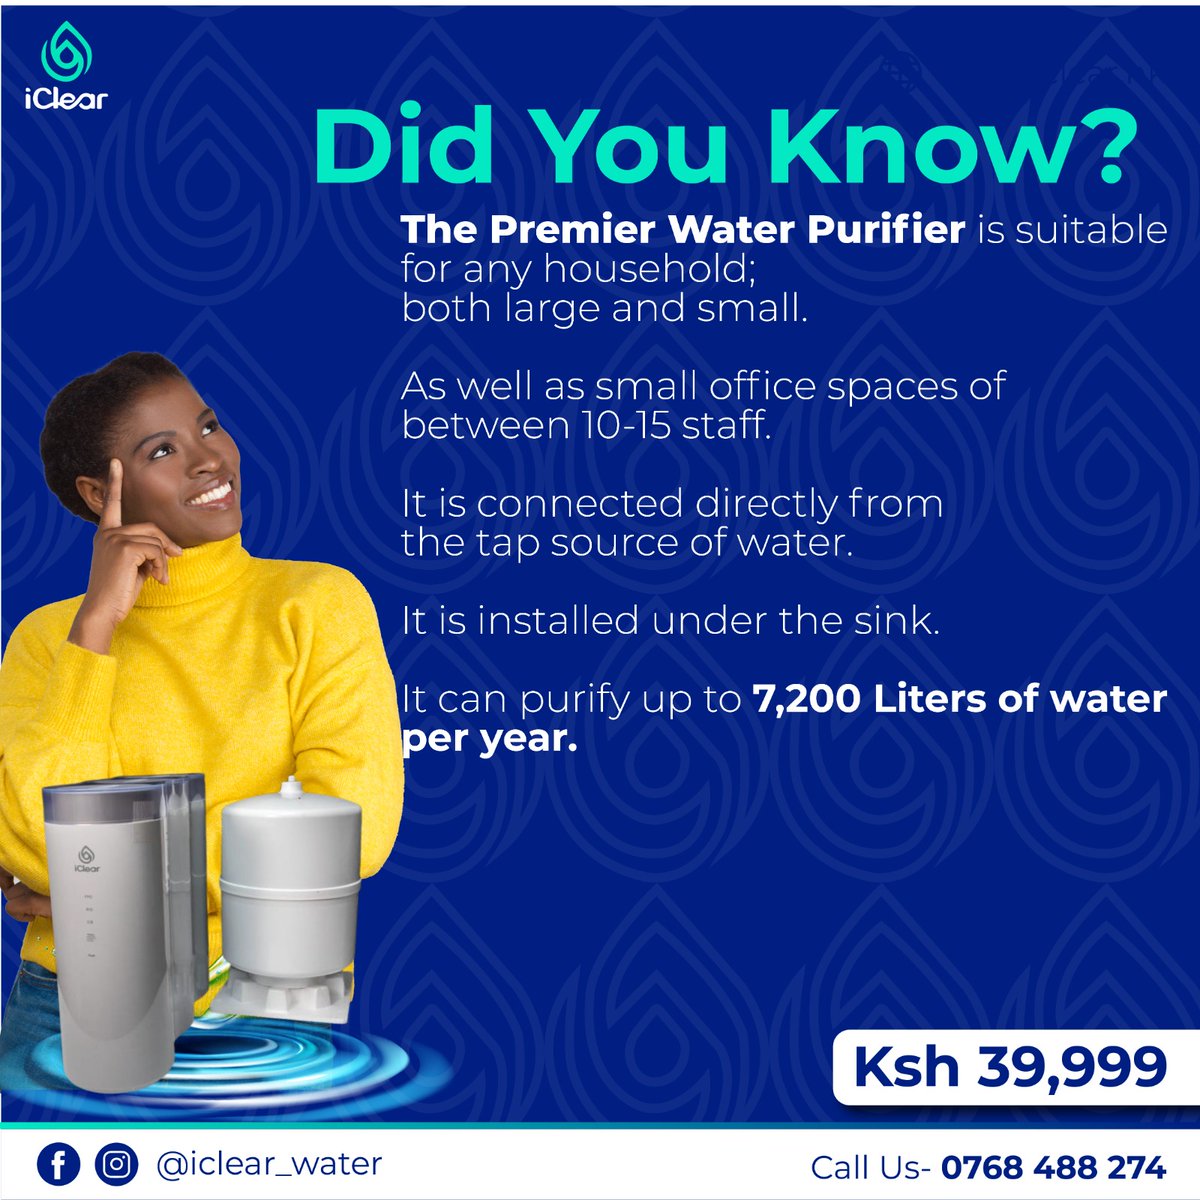 Did you know?

Contact or visit our office at 7th Floor, Eco bank Towers, Muindi Mbingu Street. #WaterPurification #CleanWater